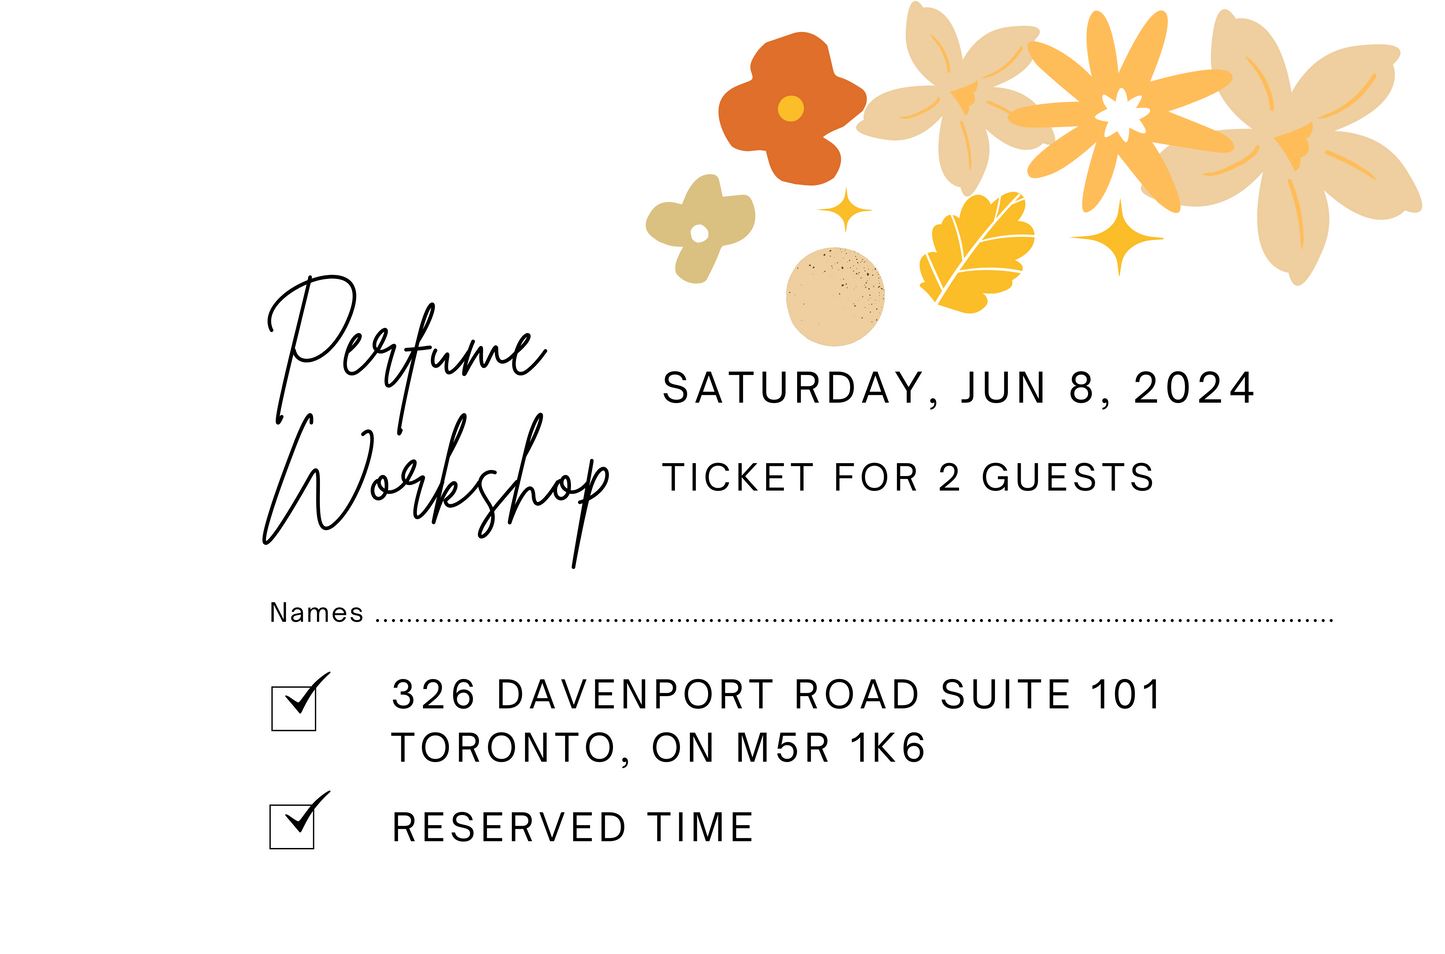 June 8th, 2024 Perfume/Cologne Workshop Session For 2 Guests